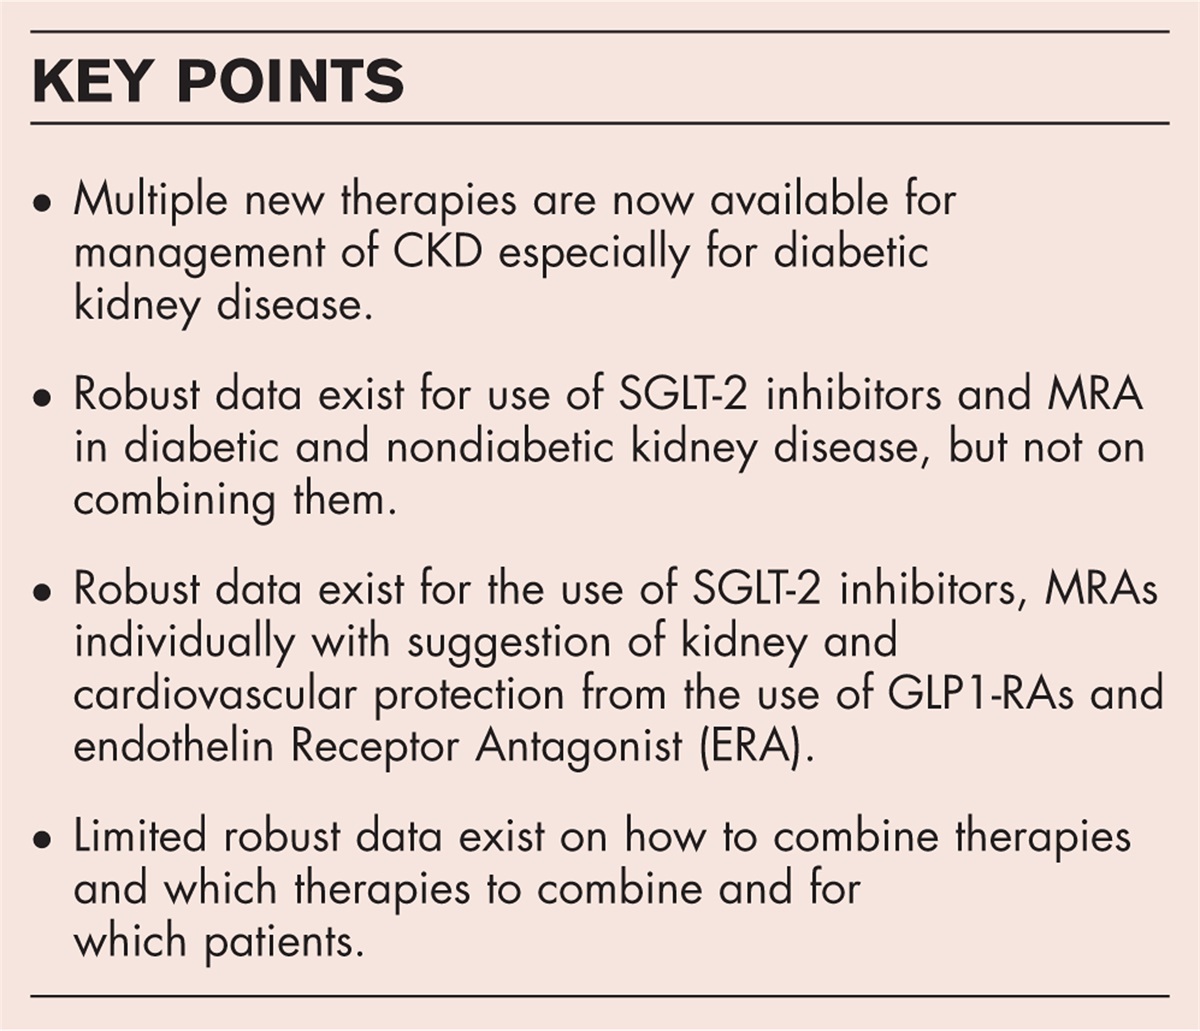 Combination therapy with kidney protective therapies: optimizing the benefits?